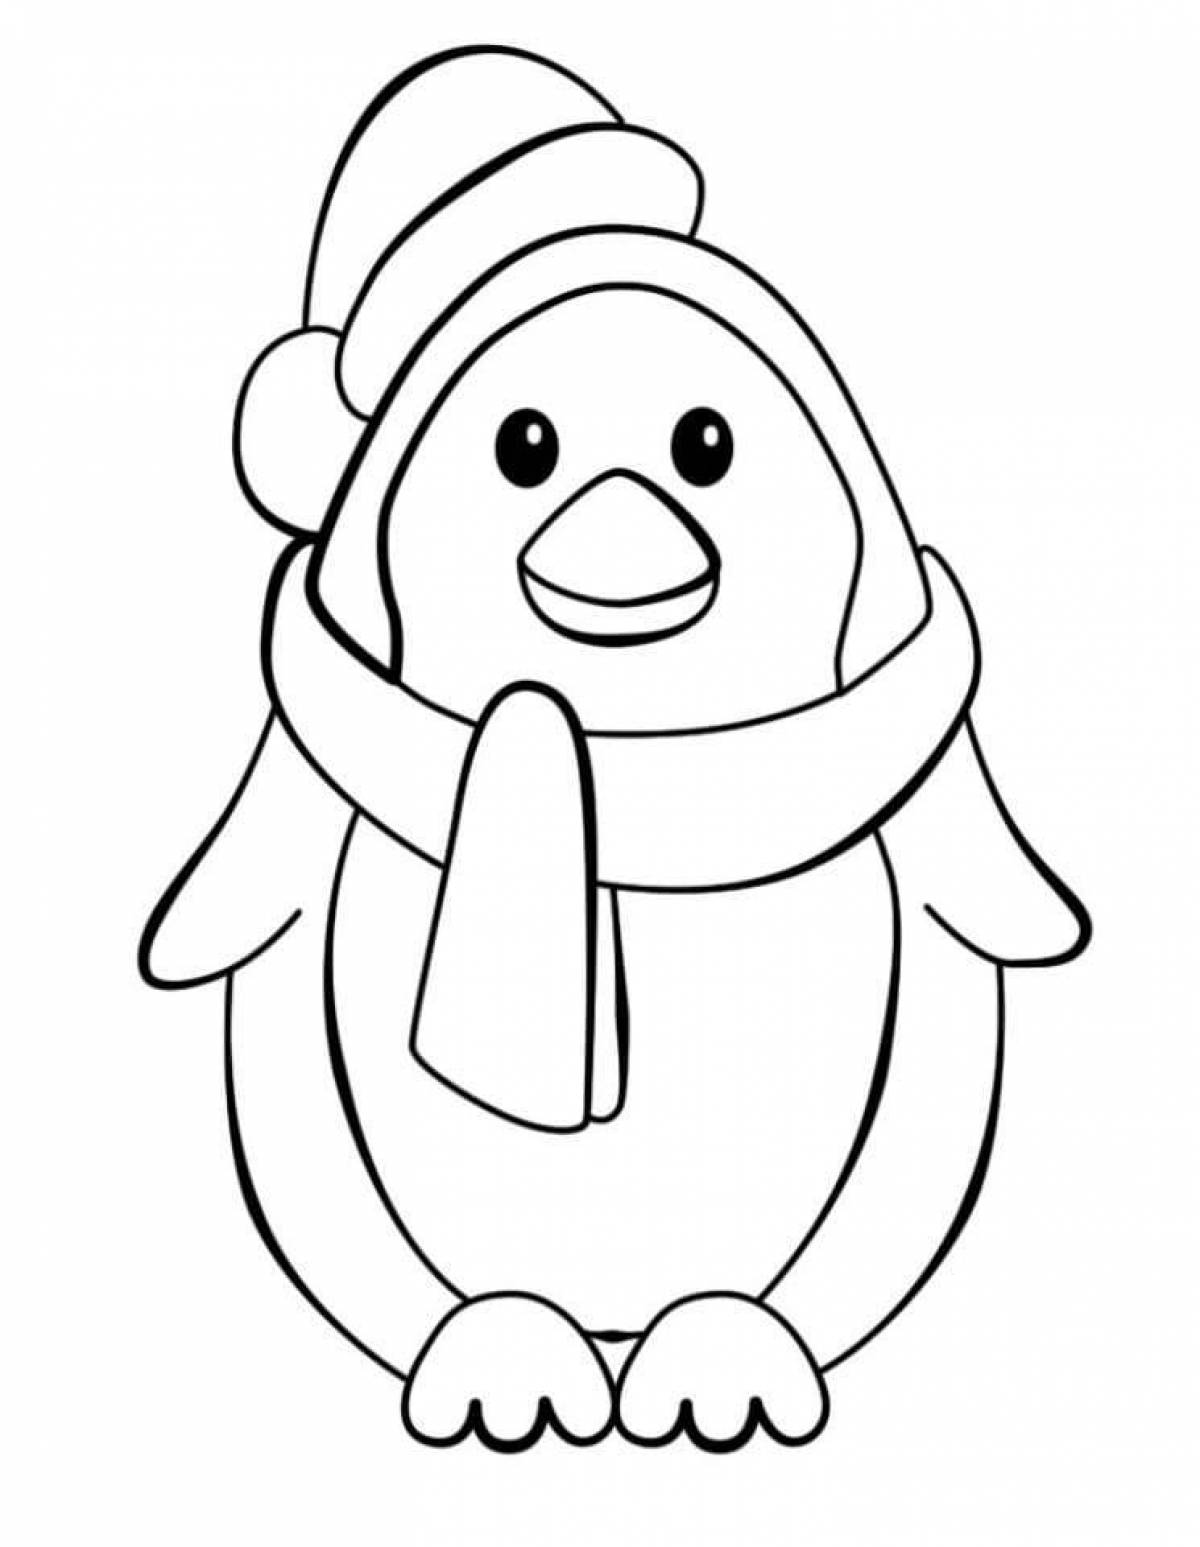 Adorable penguin coloring book for kids